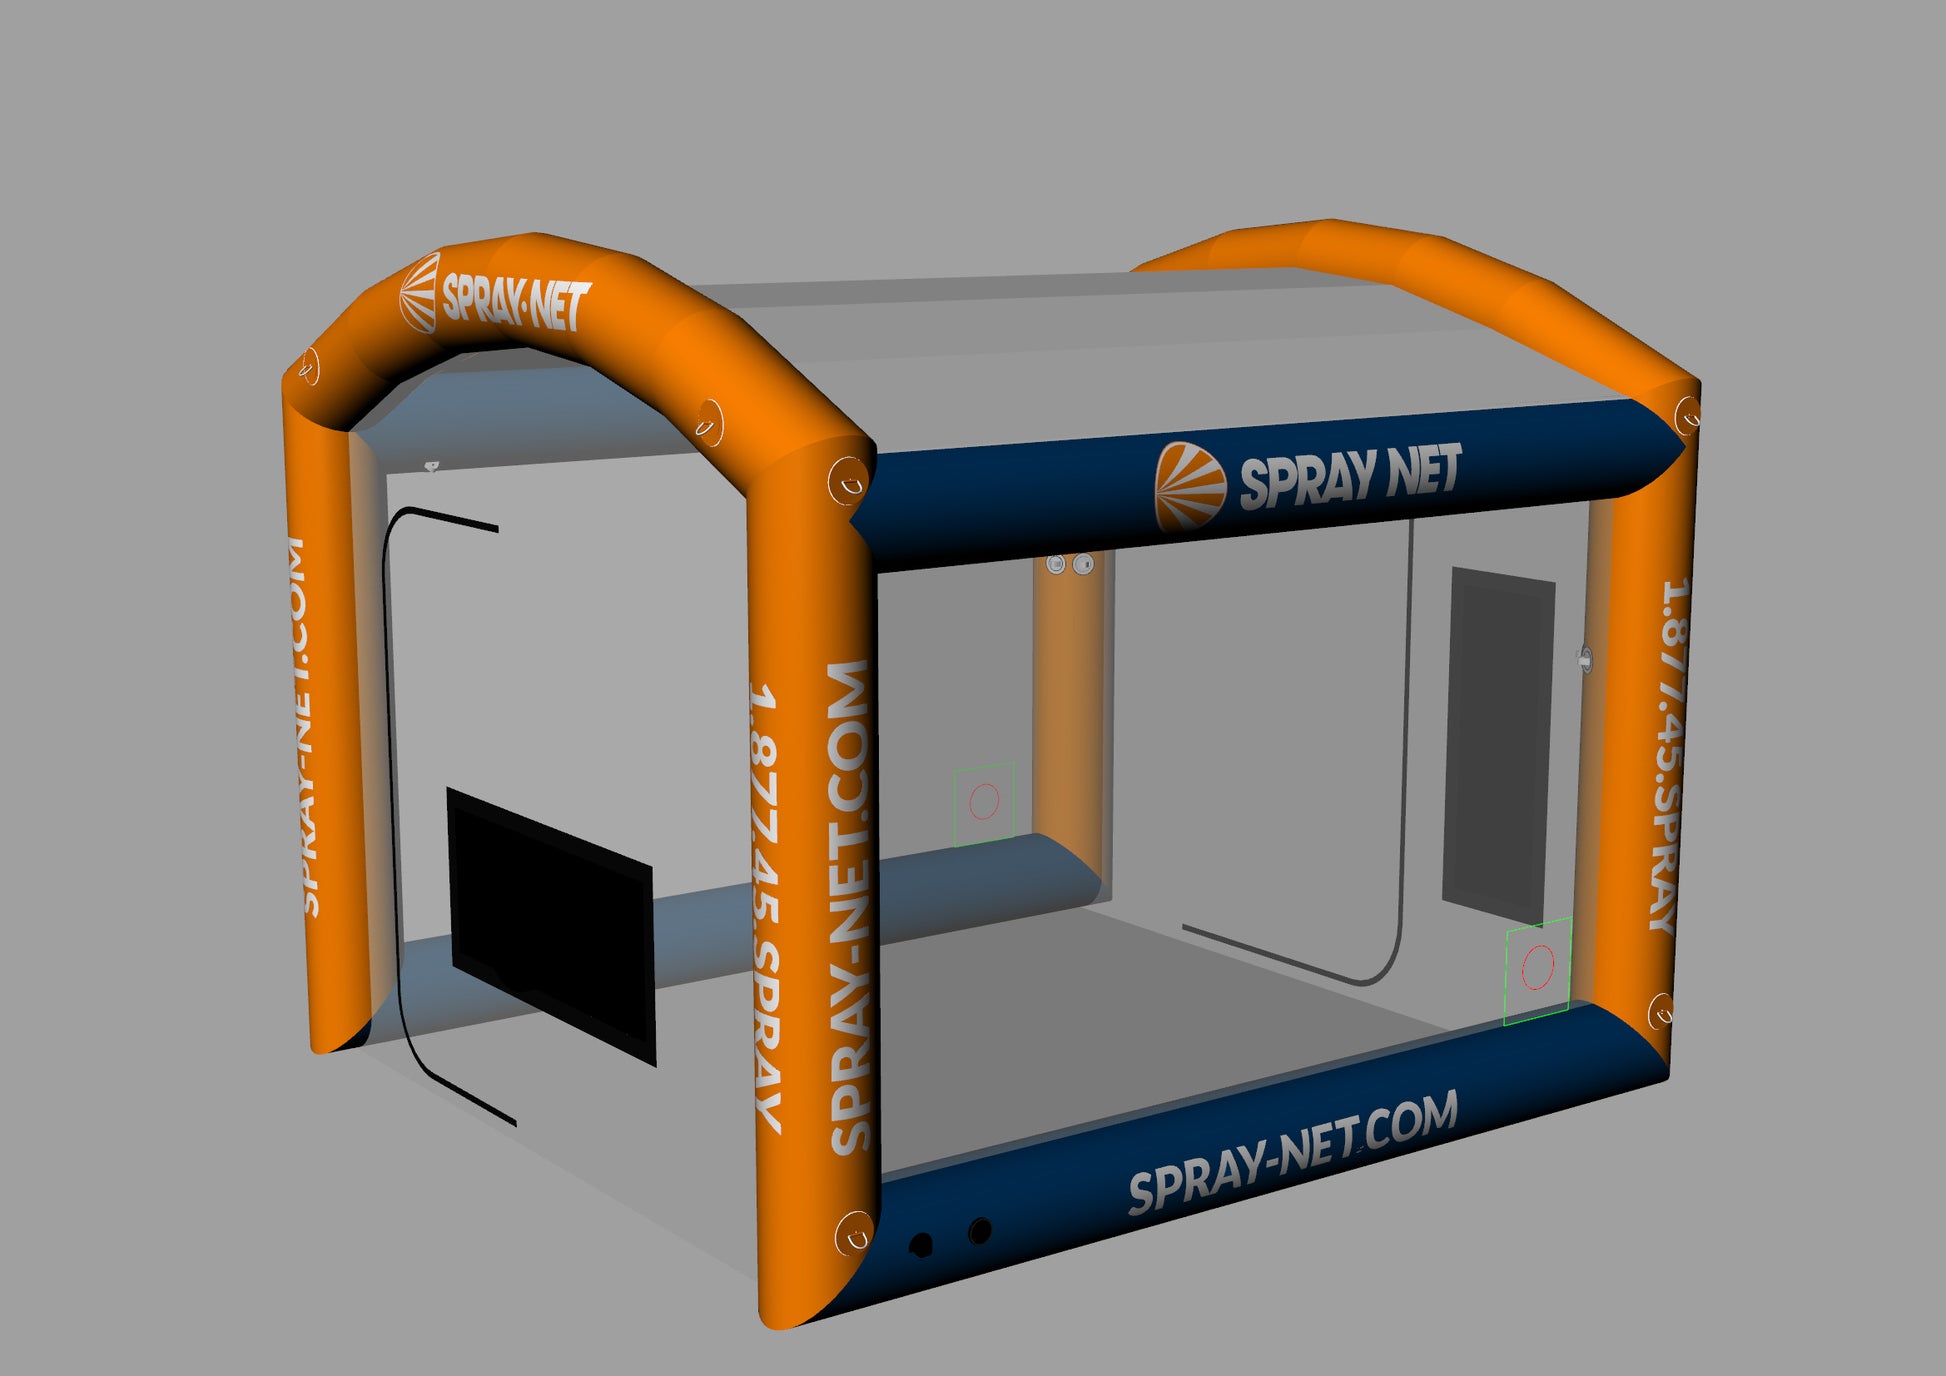 Inflatable Spray Paint Booth | Portable Inflatable Booth for Painting Doors, Windows and Cabinets | Deluxe Canopy